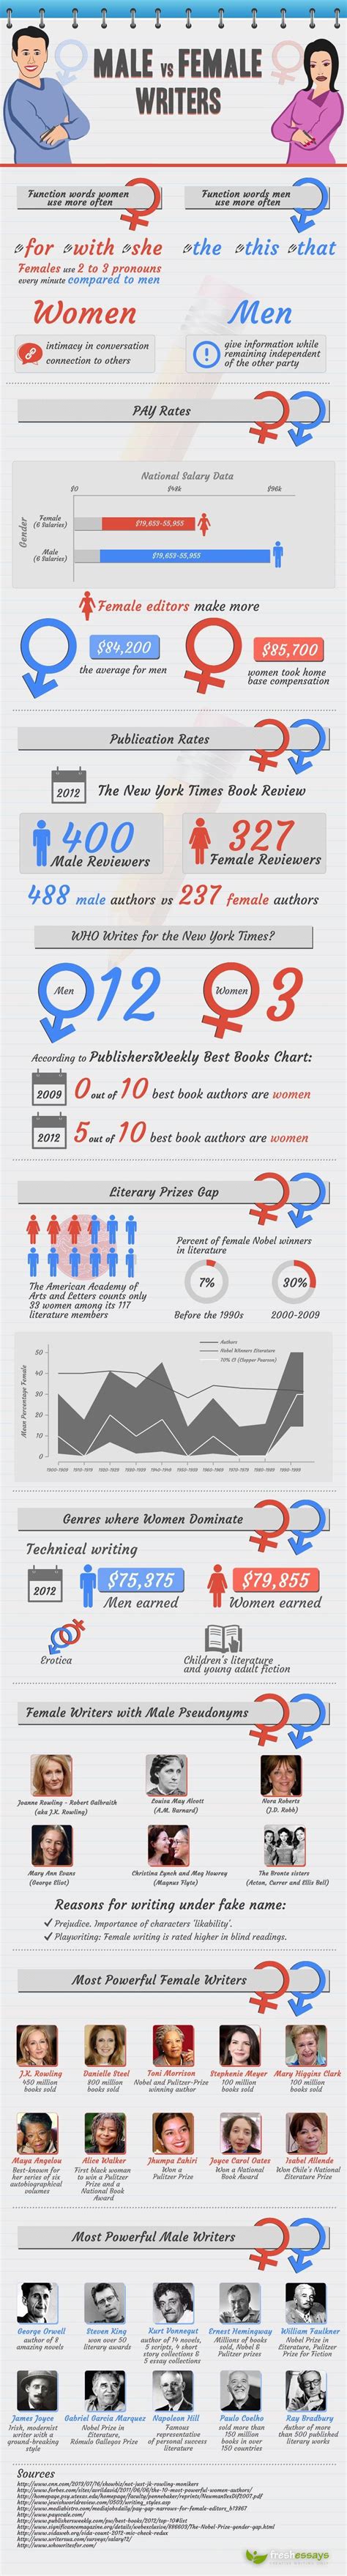 Comparing Male Vs Female Writers Infographic